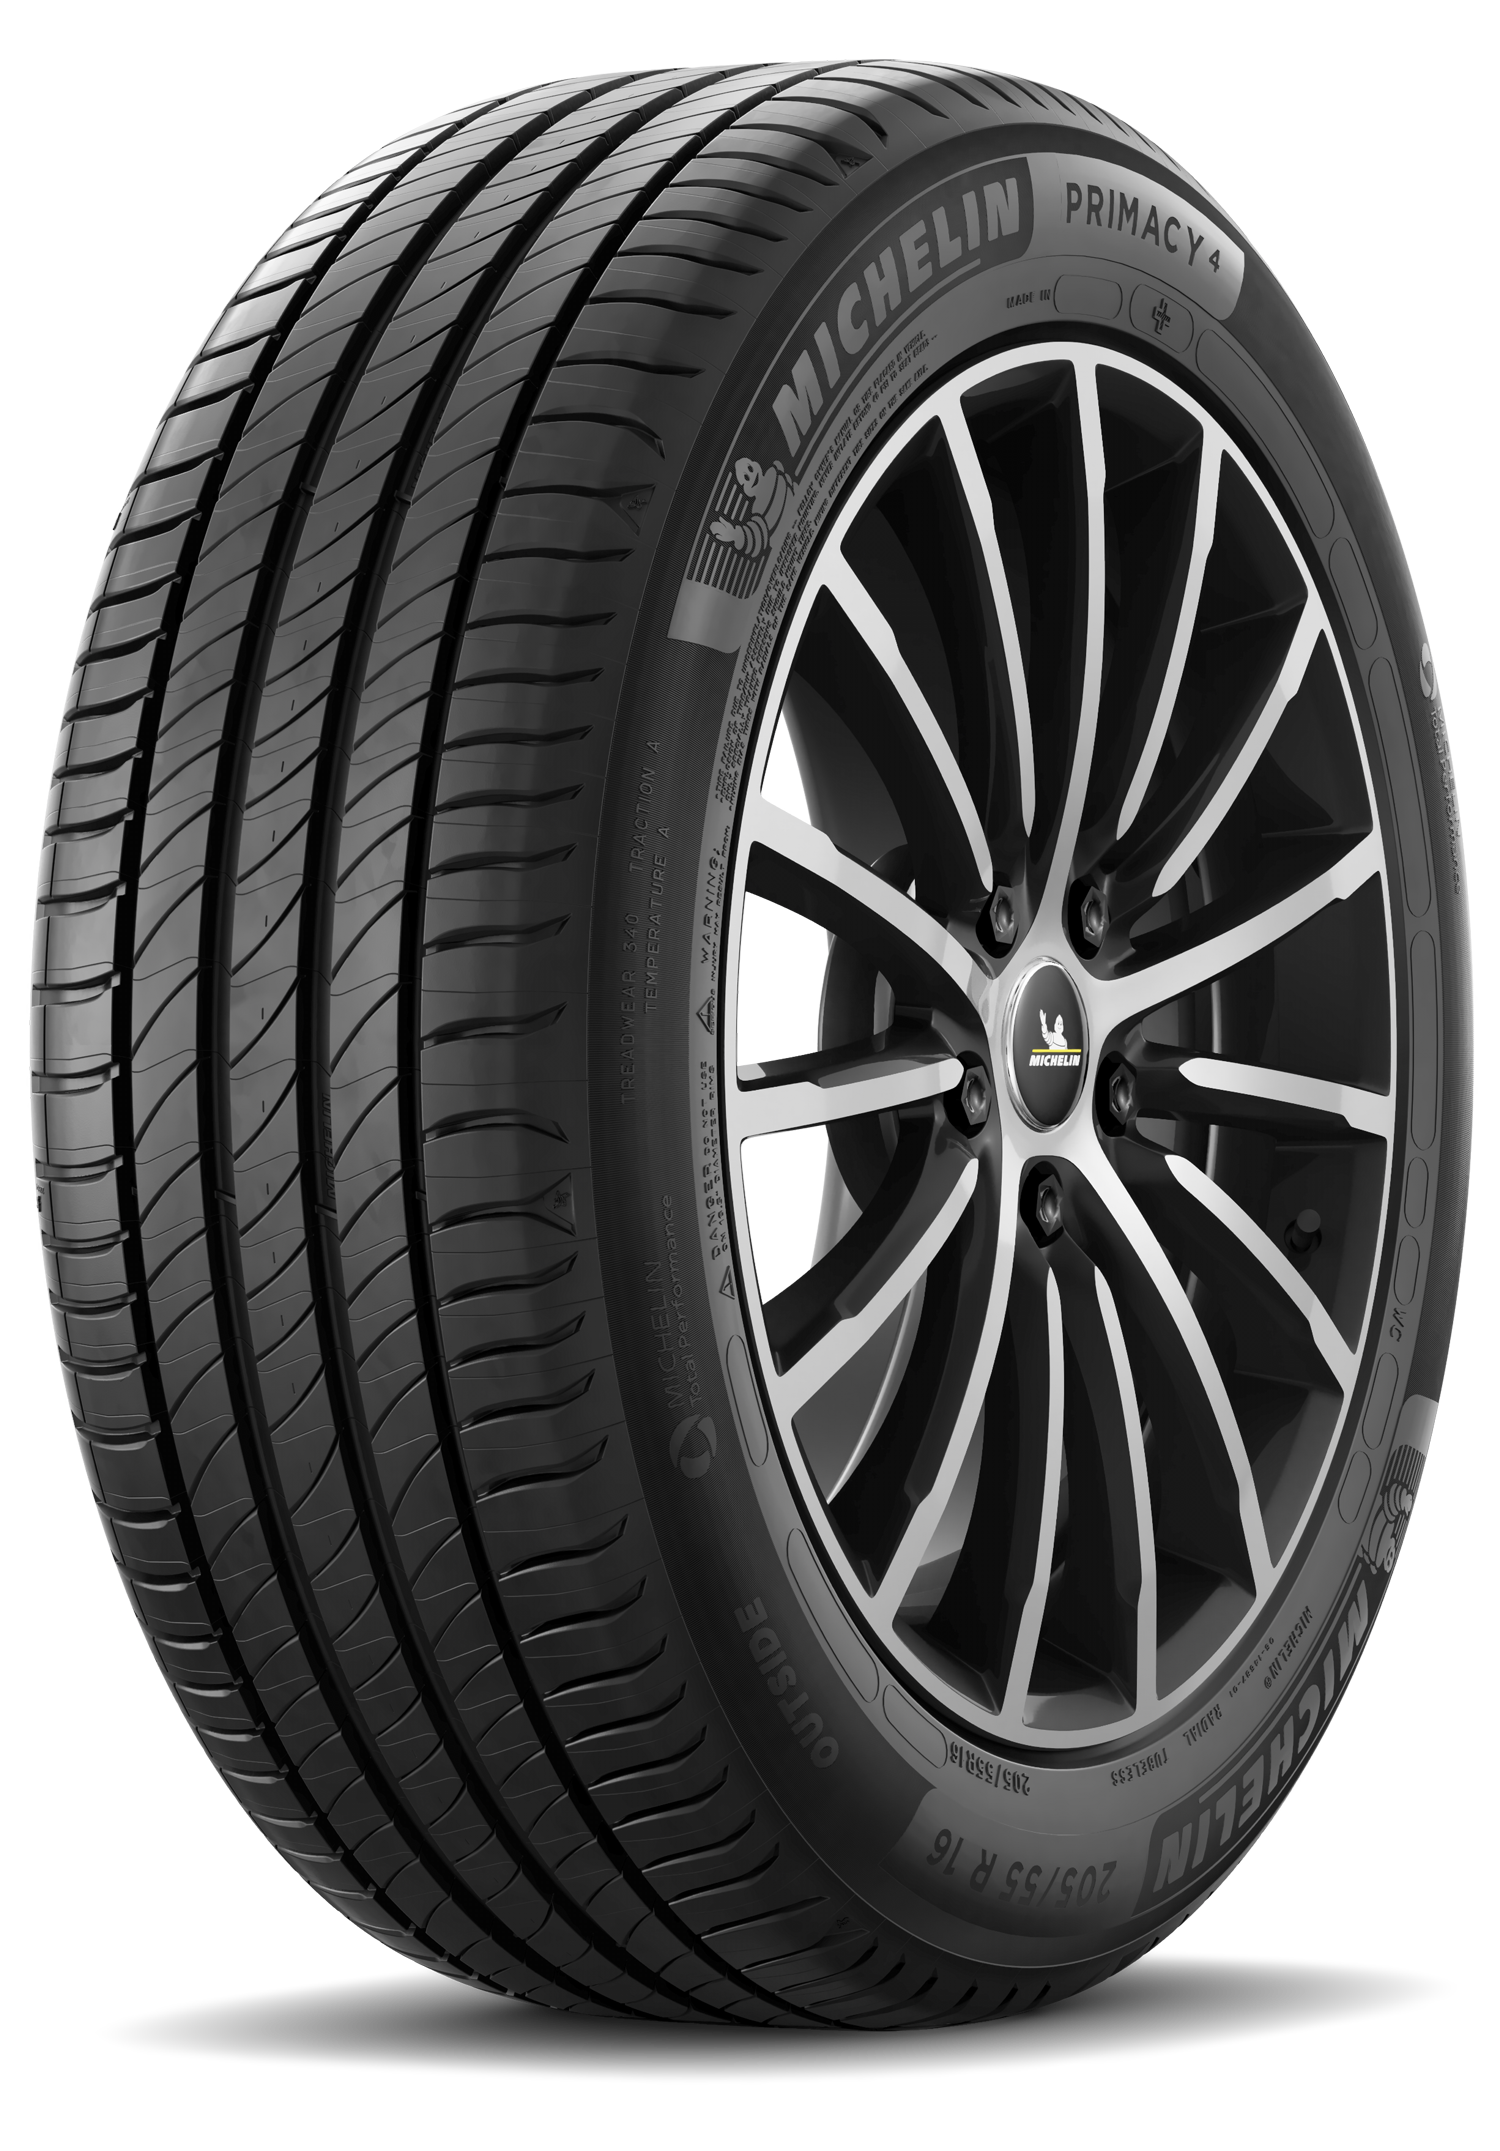 michelin-primacy-4-plus-tyre-reviews-and-tests